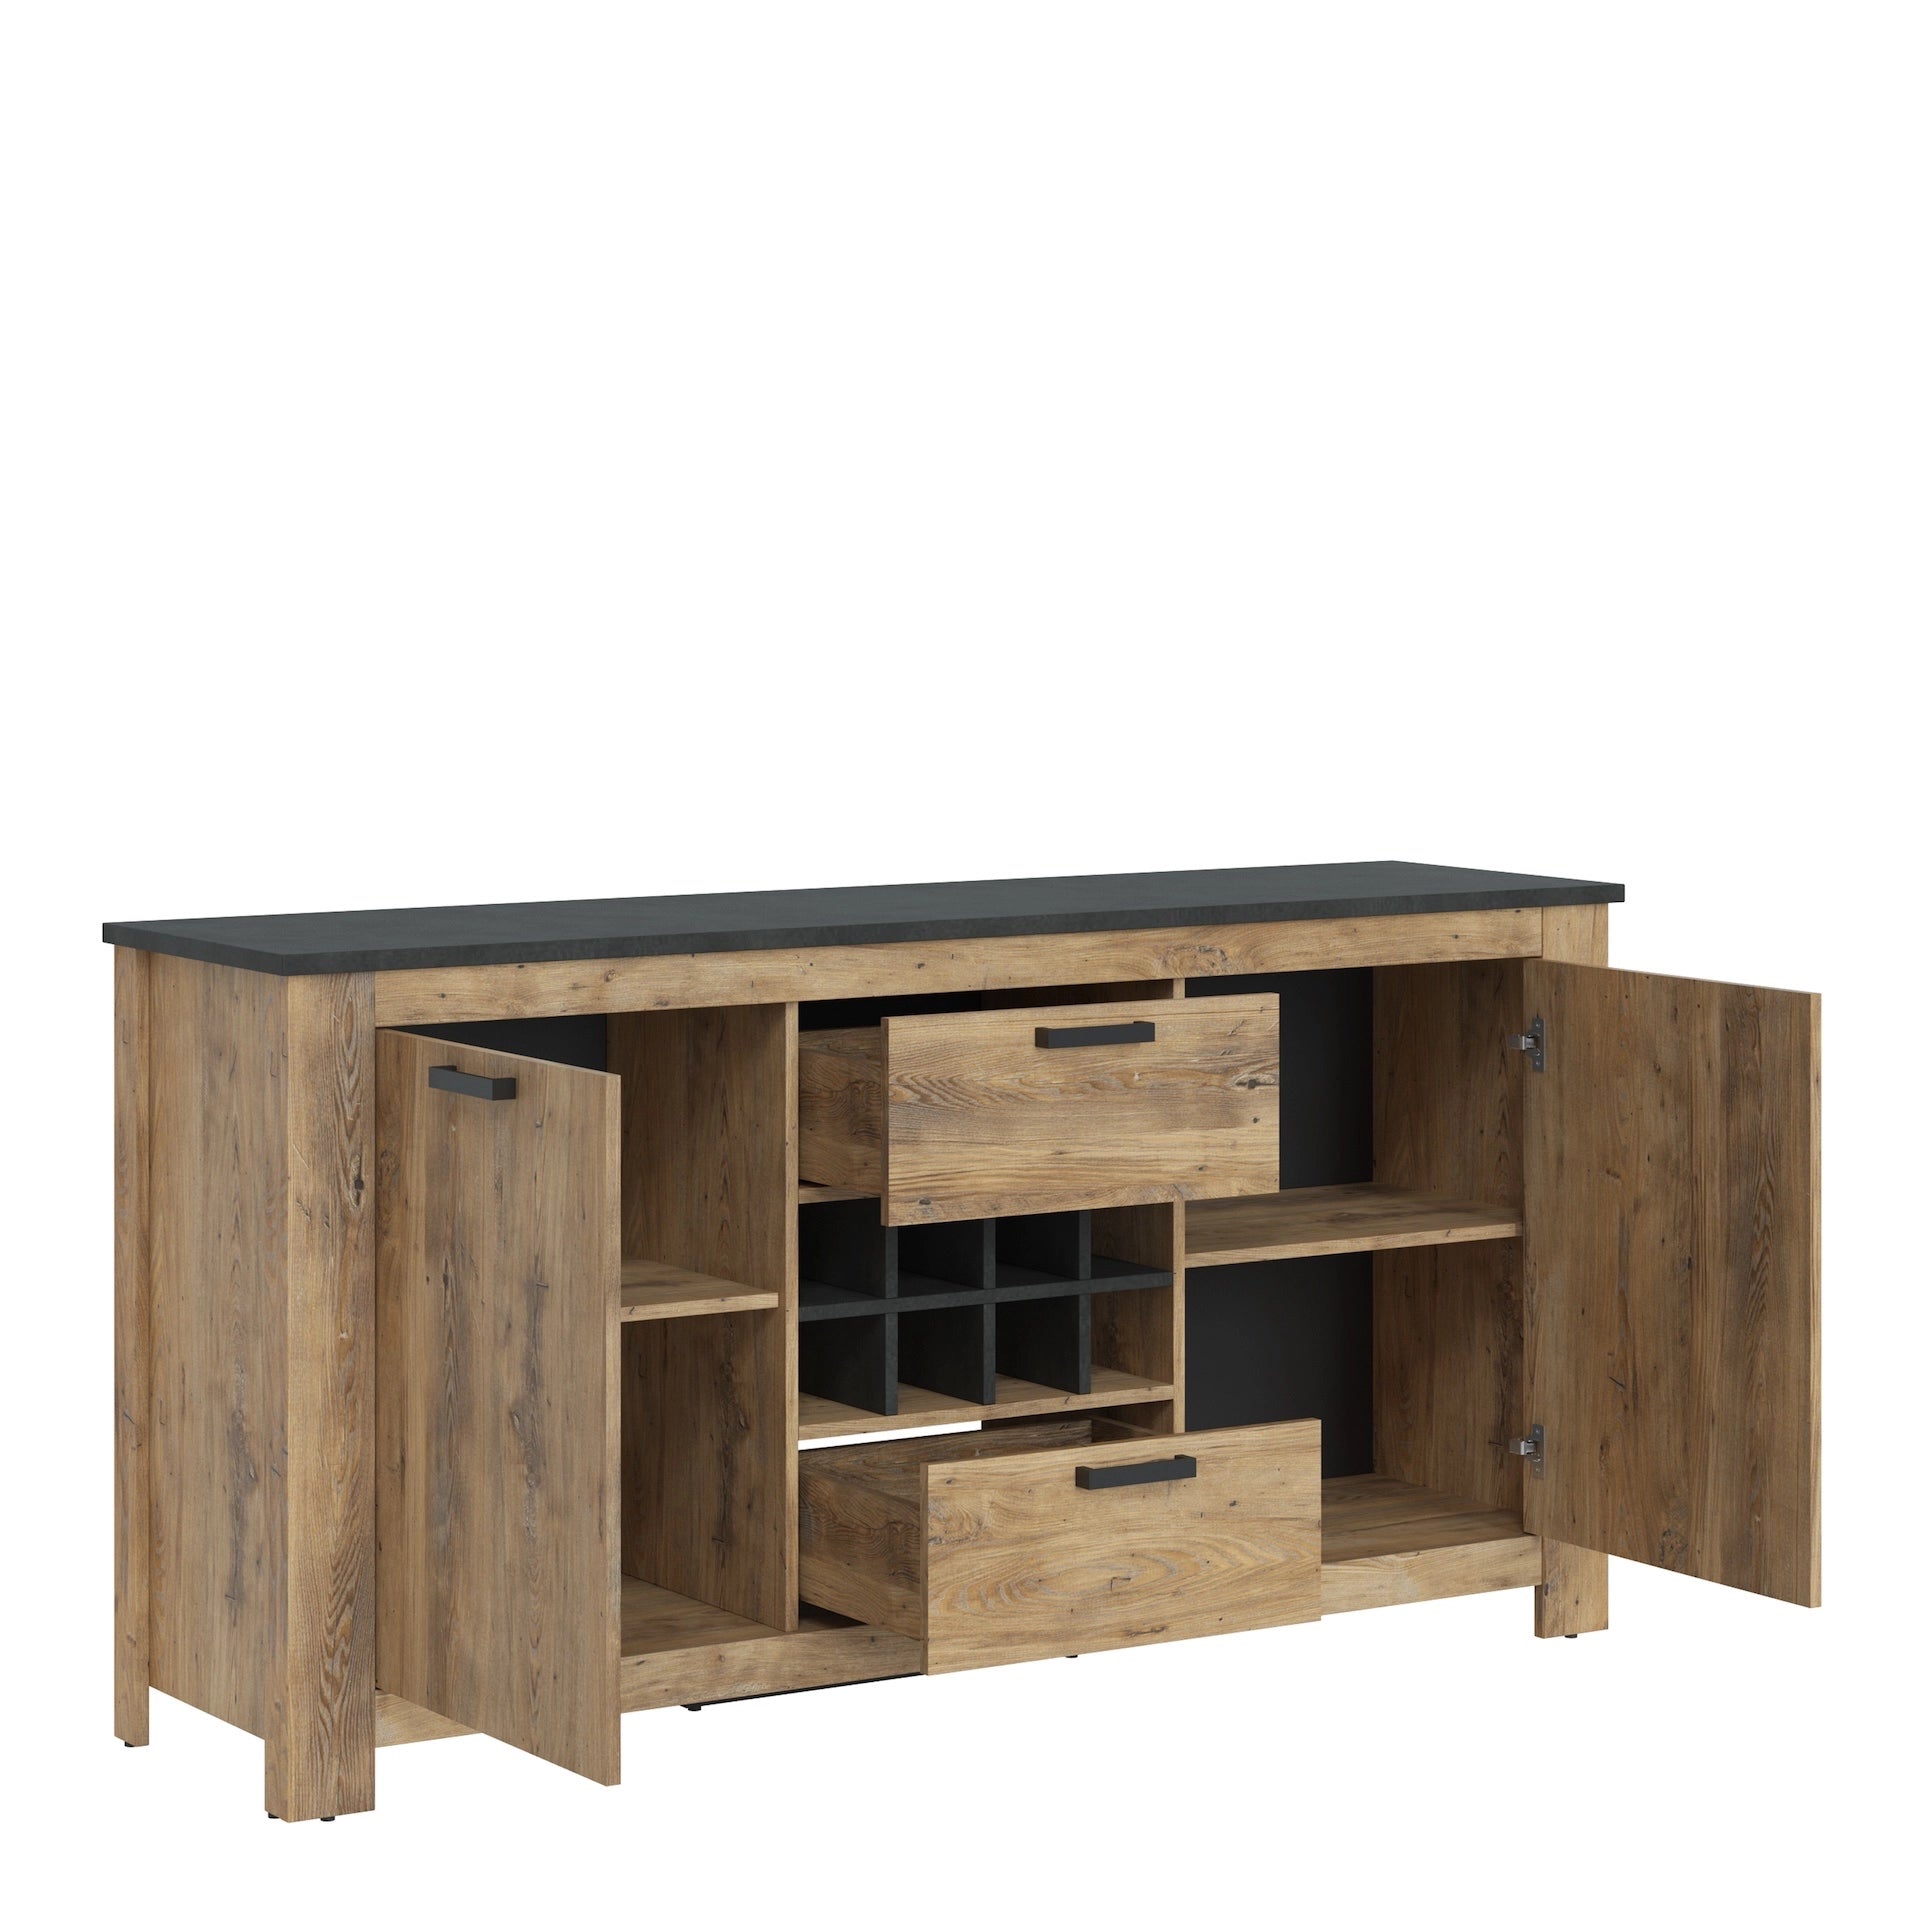 Furniture To Go Rapallo 2 Door 2 Drawer Sideboard with Wine Rack in Chestnut & Matera Grey